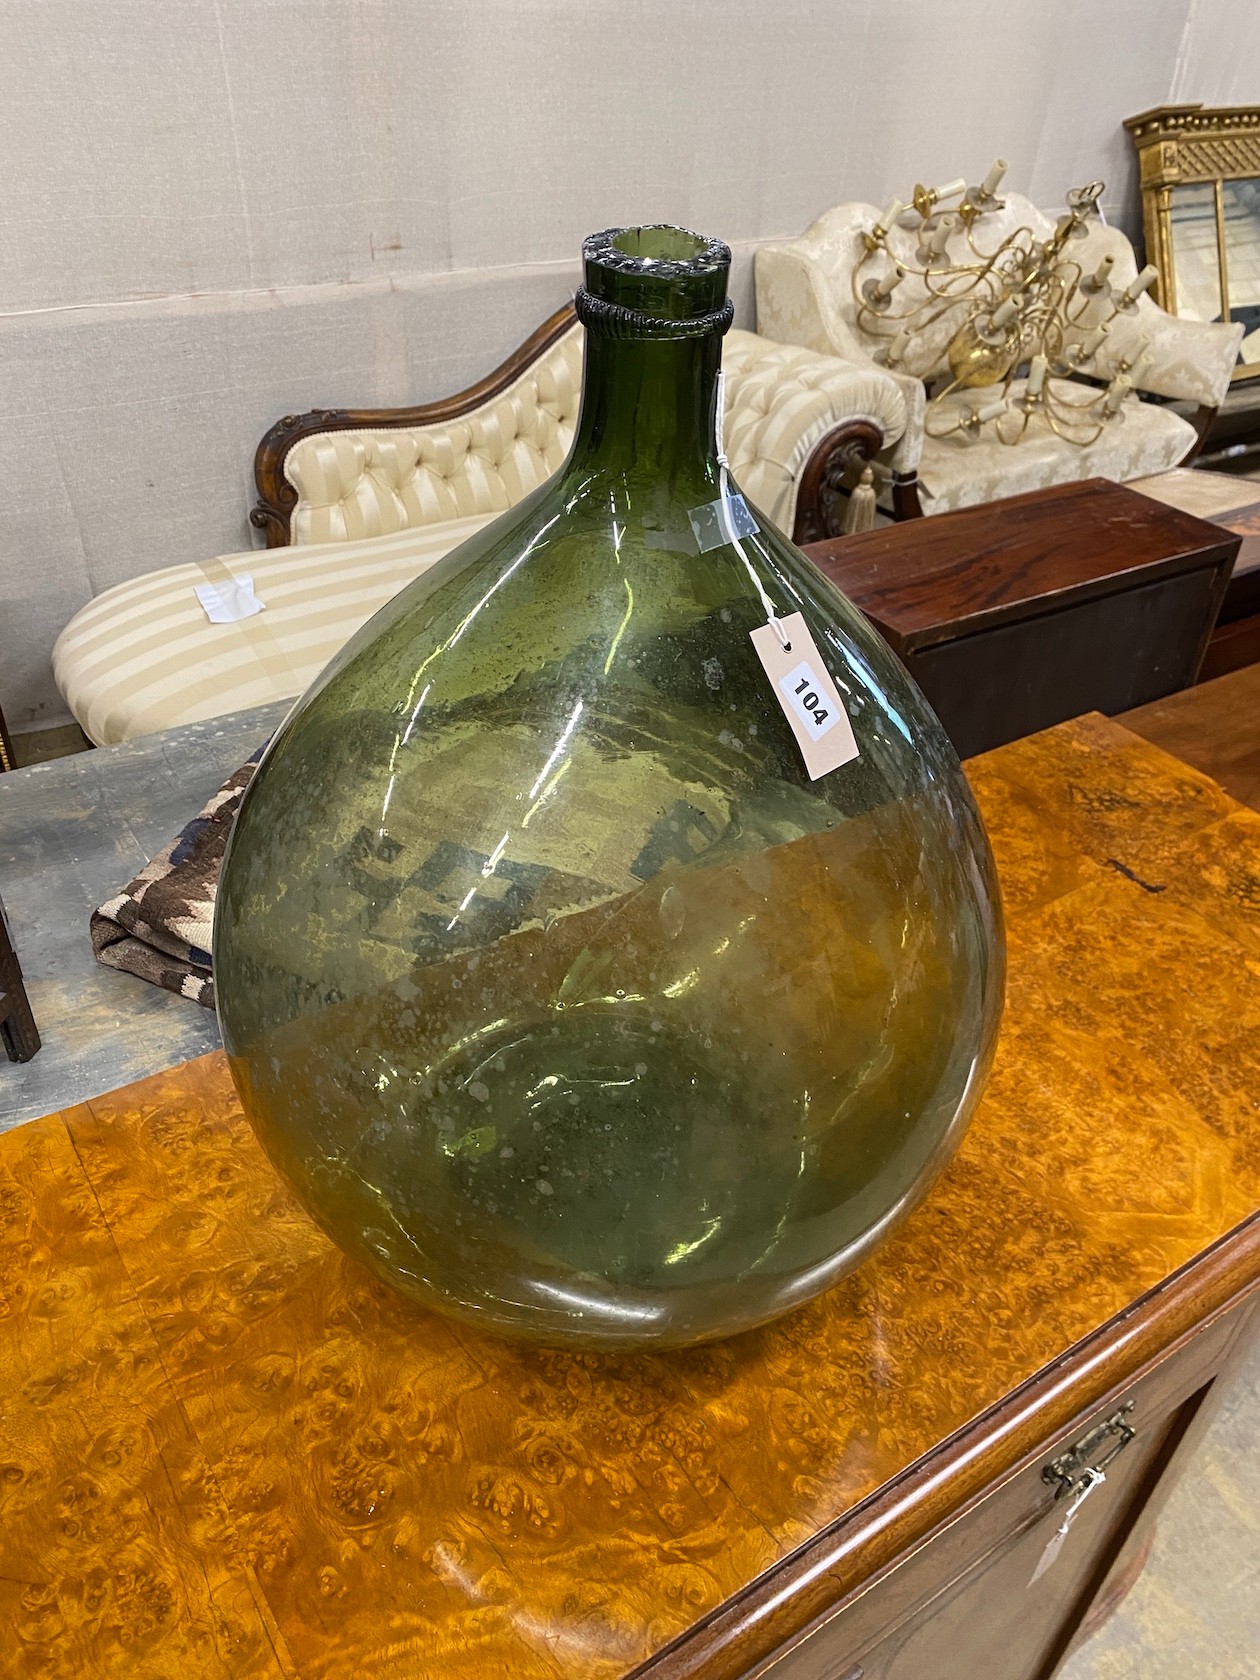 A large green glass carboy, height 60cm